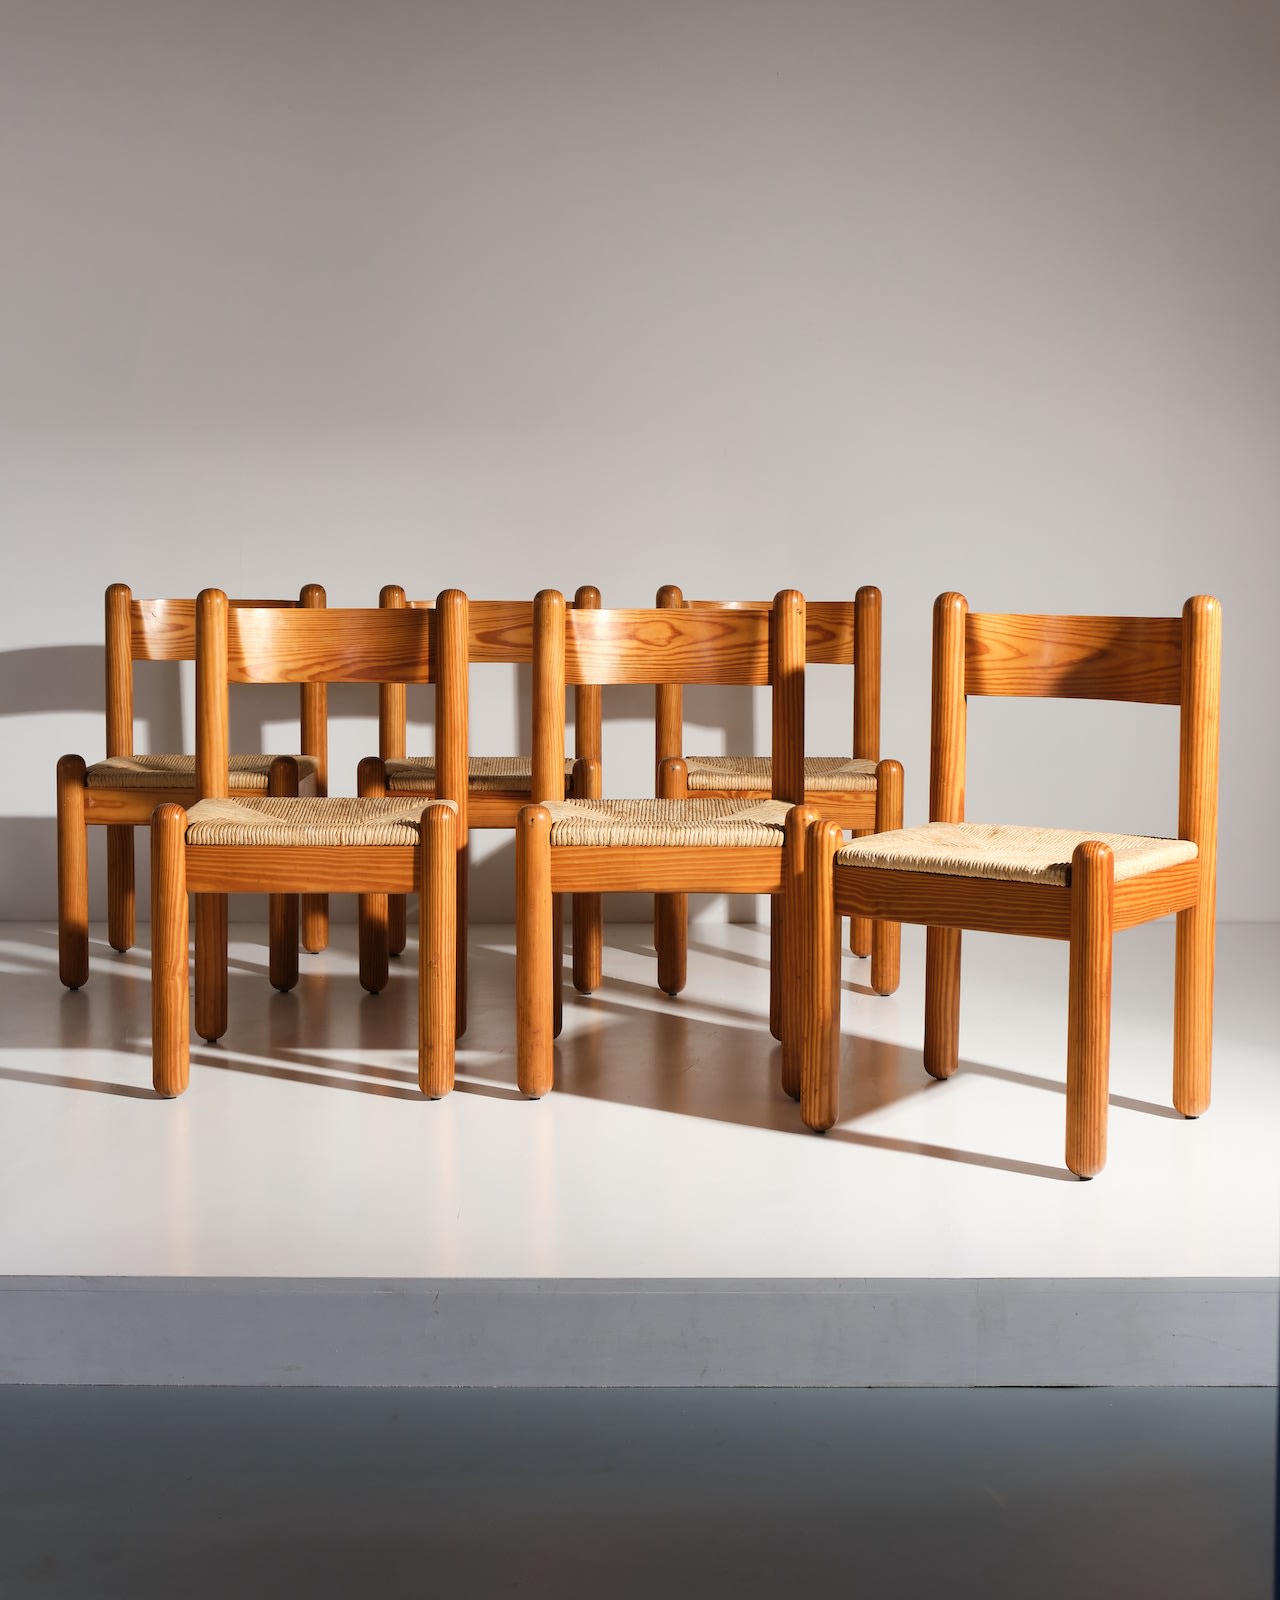 Collecting Charlotte Perriand's Wood Furniture